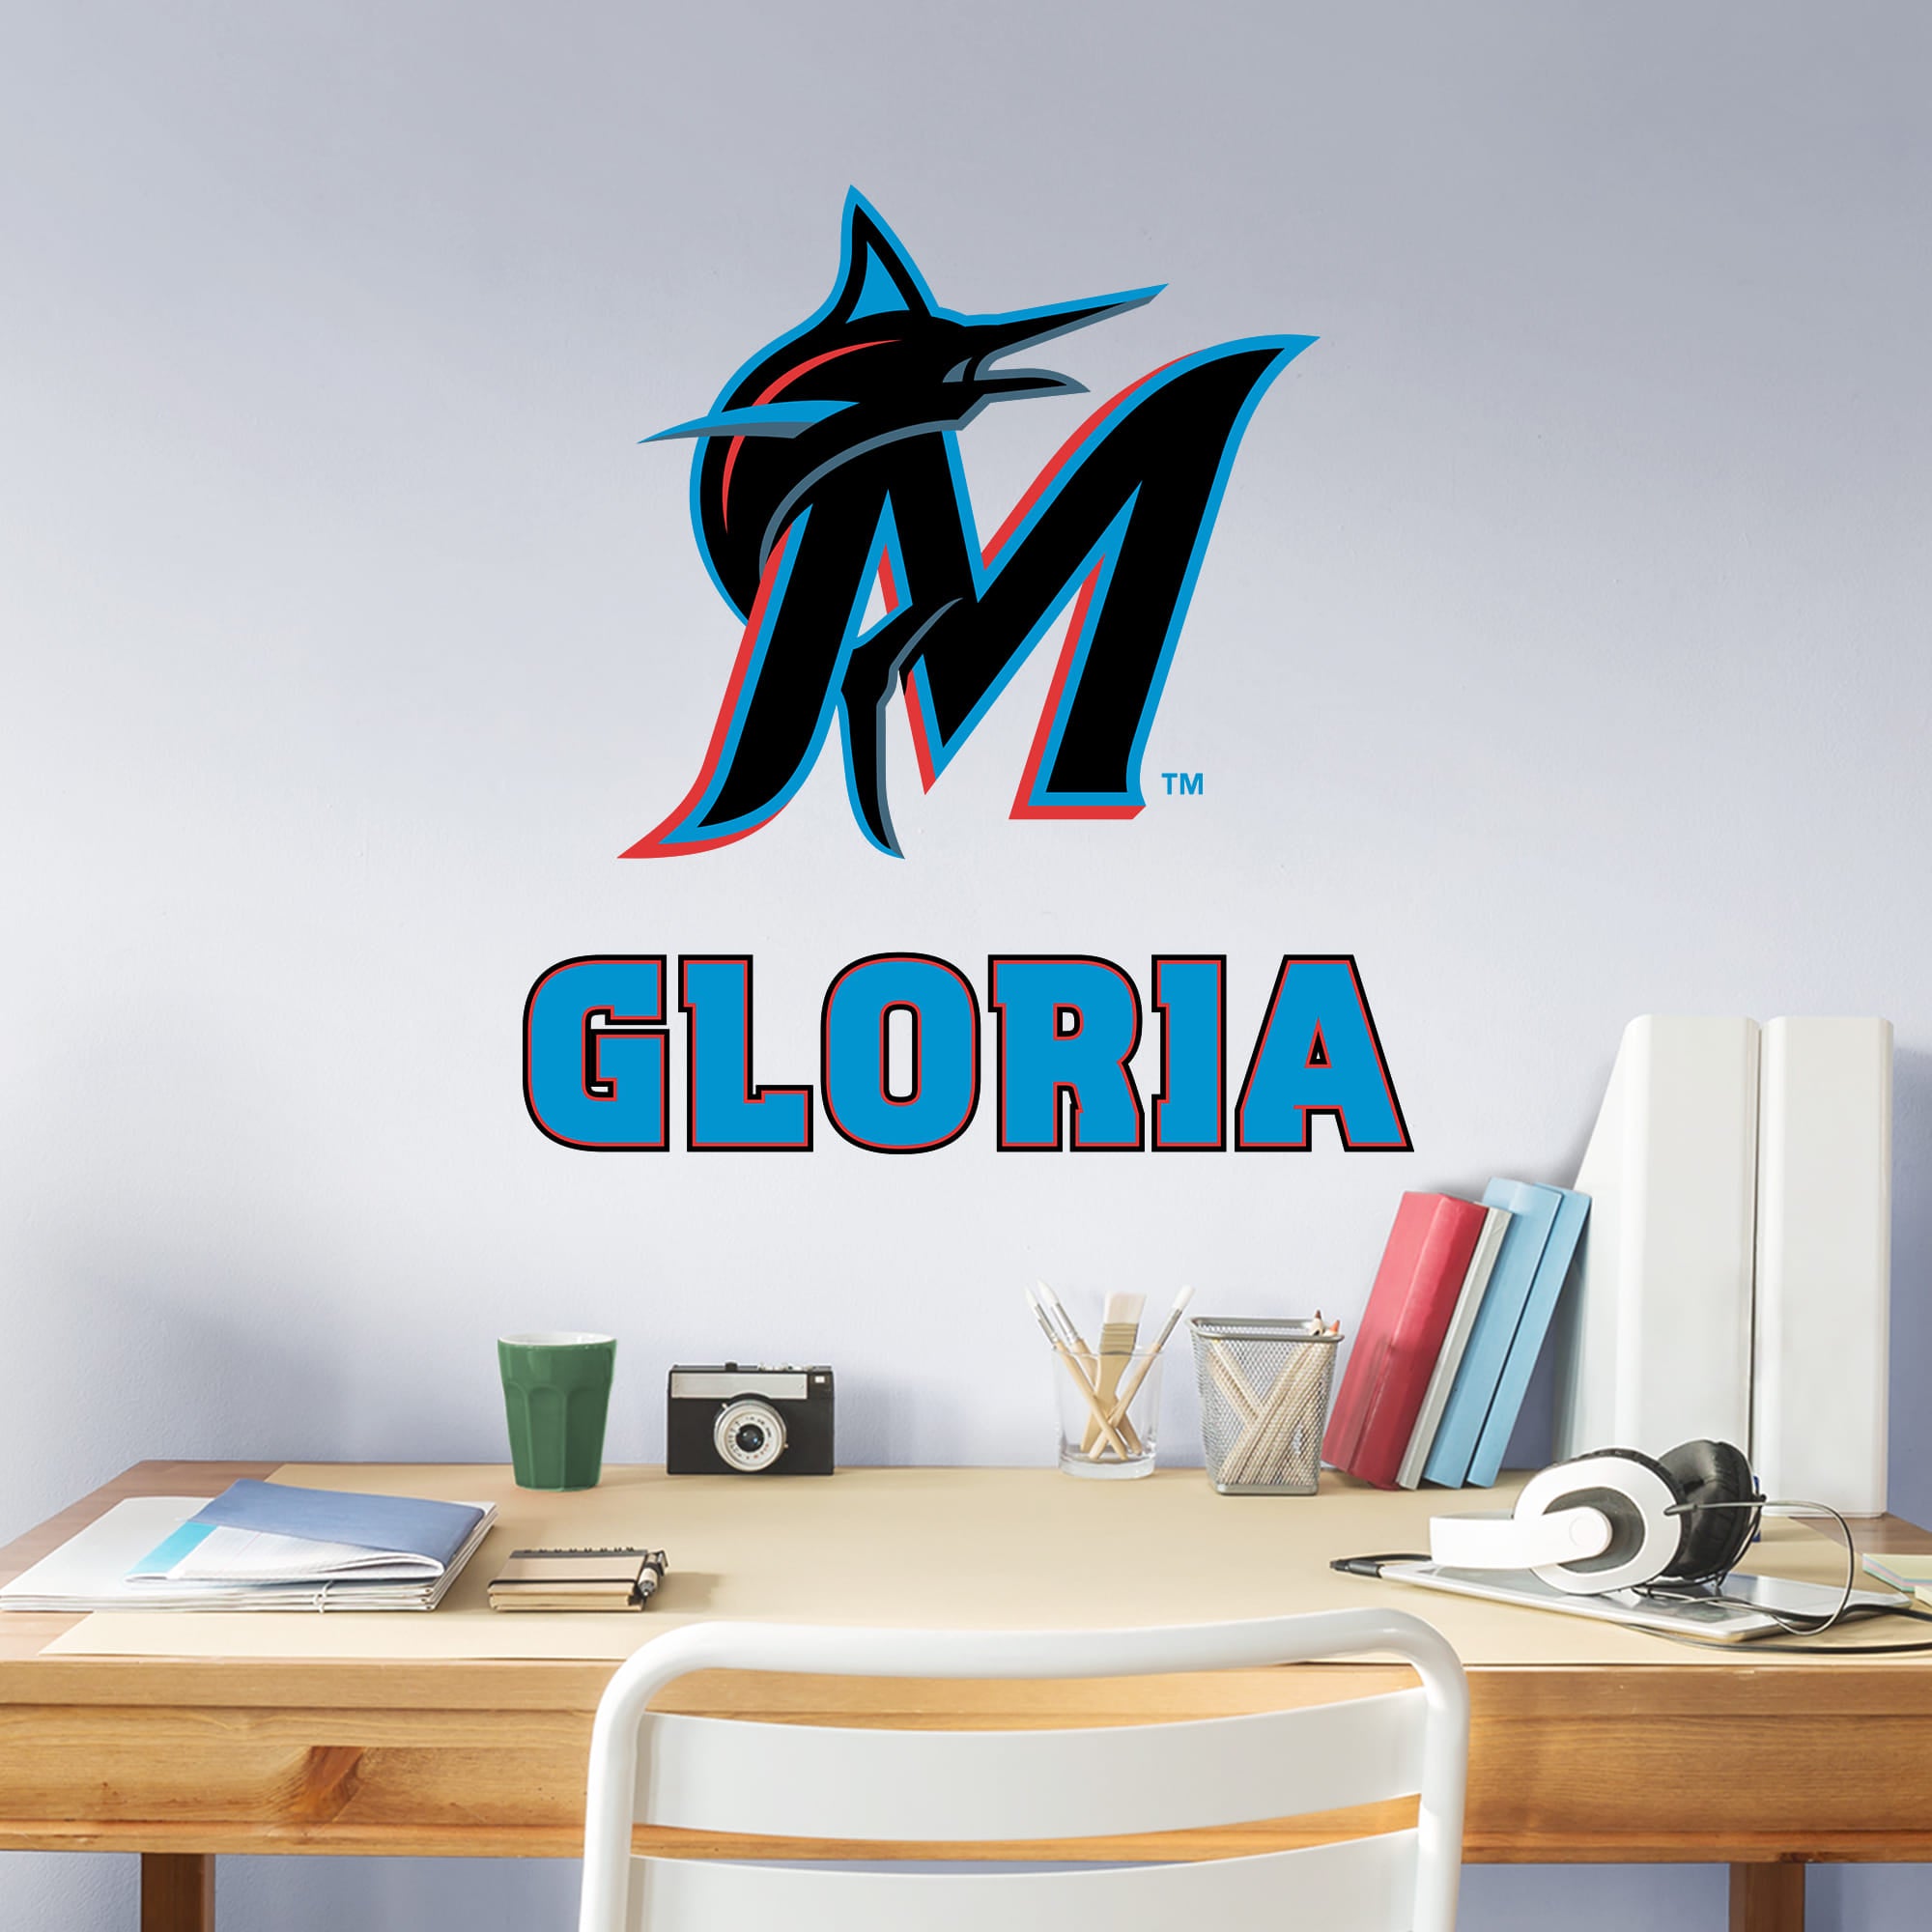 Miami Marlins: Stacked Personalized Name - Officially Licensed MLB Transfer Decal in Blue (52"W x 39.5"H) by Fathead | Vinyl